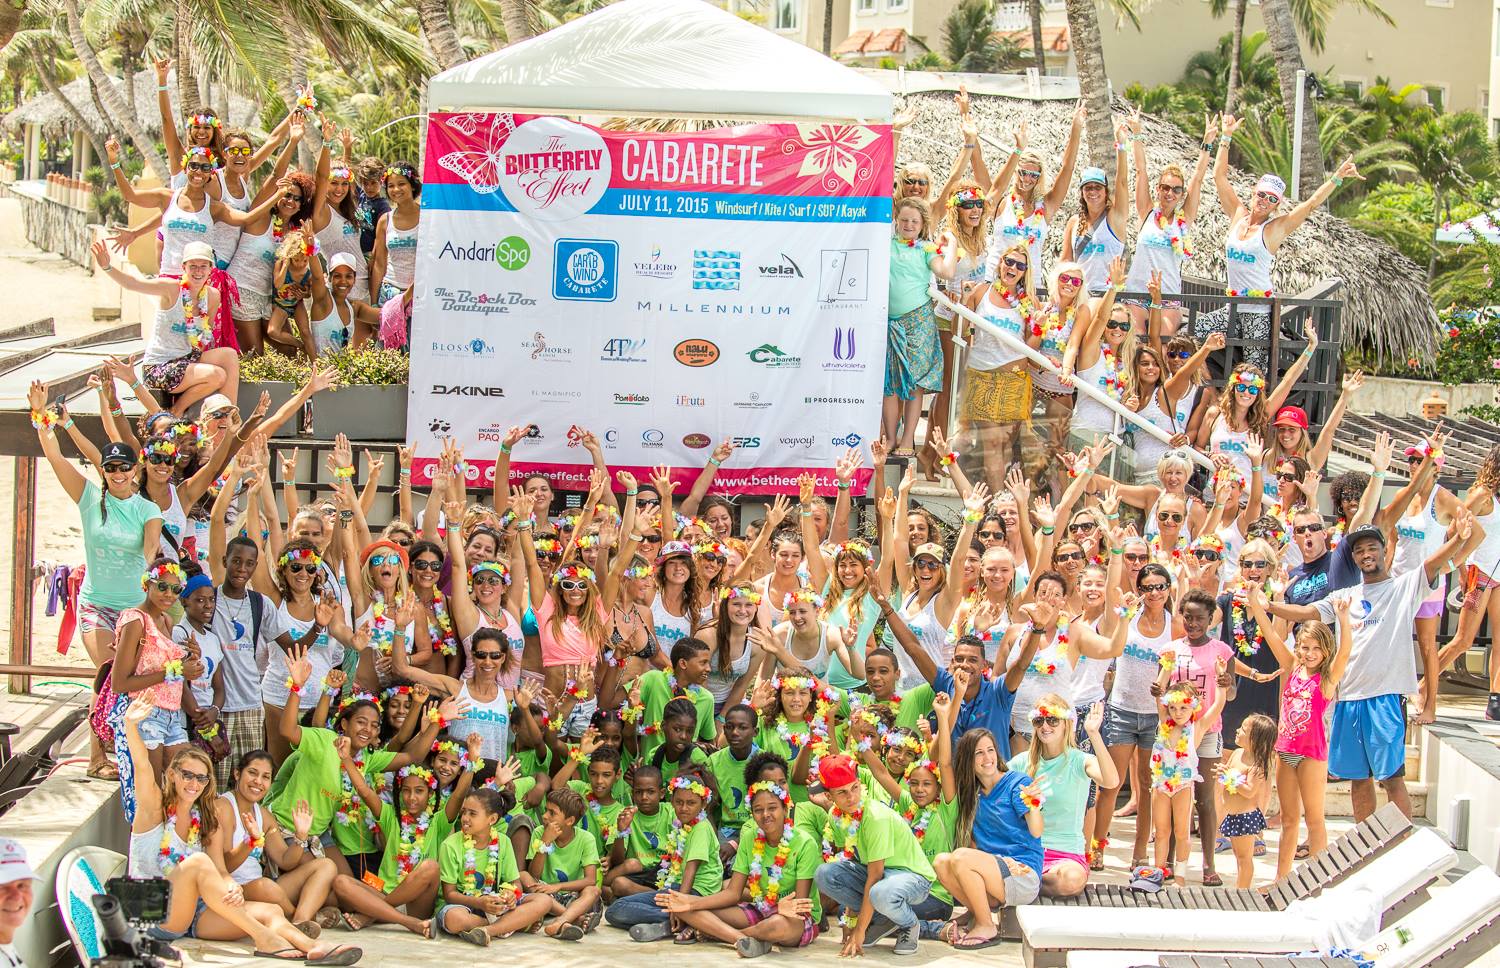 100 girls together in the water for the Butterfly Effect event Cabarete